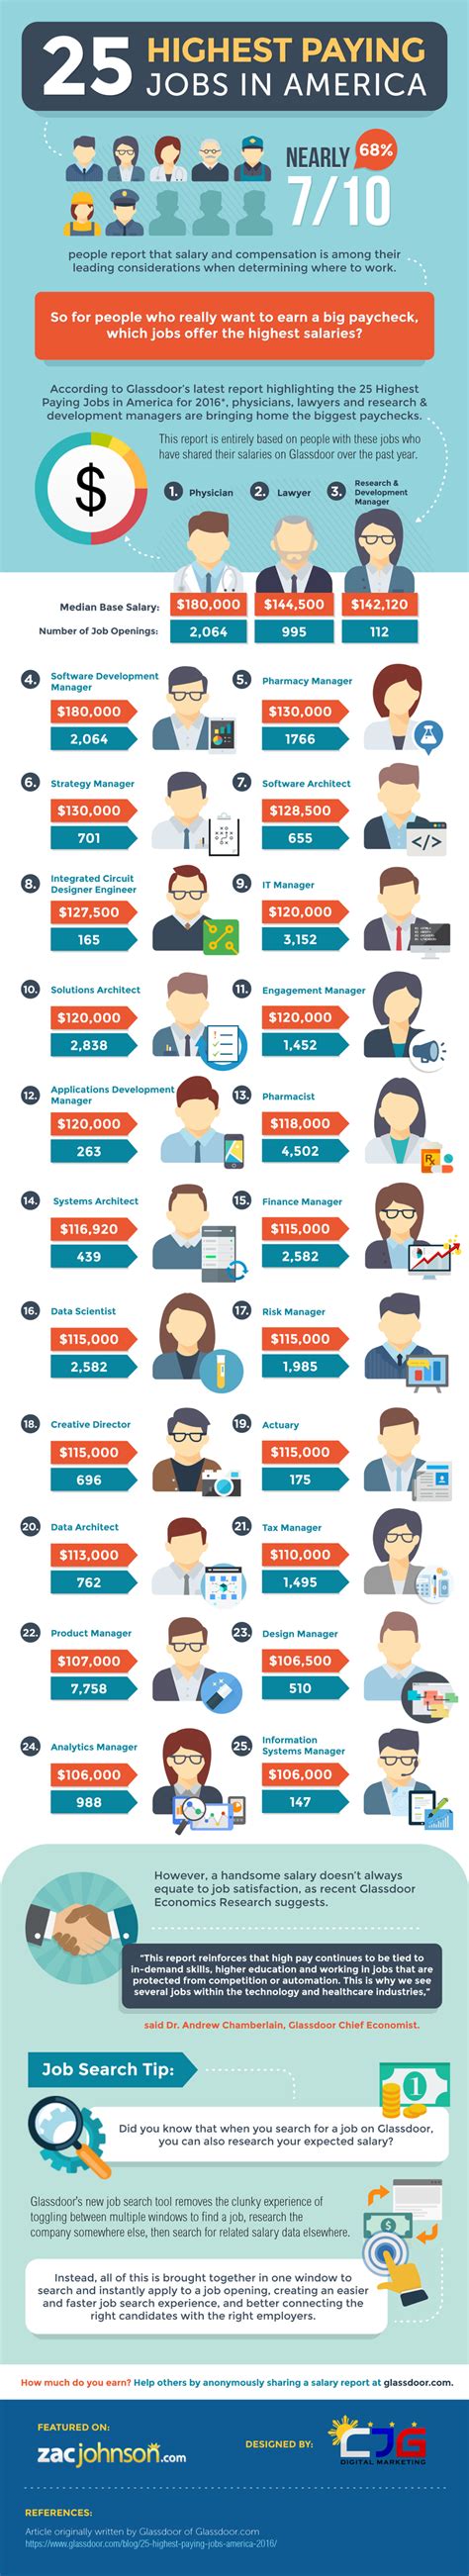 25 Highest Paying Jobs In America For 2016 Infographic